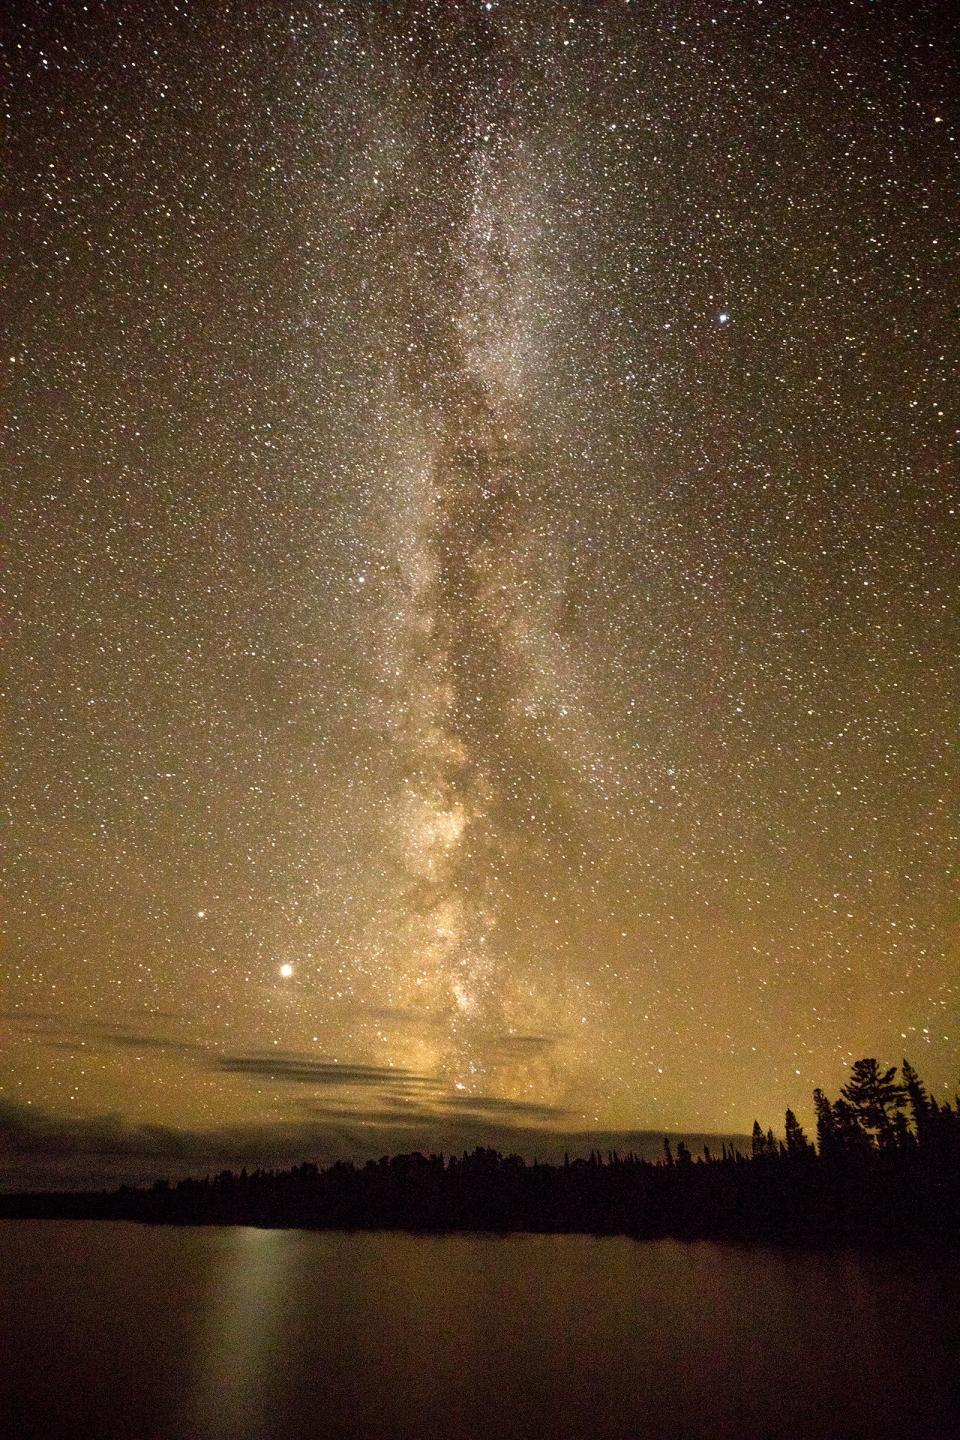 Keweenaw Mountain Lodge staffer Chris Guibert's photo from the Lake Superior shoreline in Copper Harbor shows one of many vistas that prompted lodge owner John Mueller to seek official recognition for the area as a dark sky park. The designation was officially awarded on June 6.